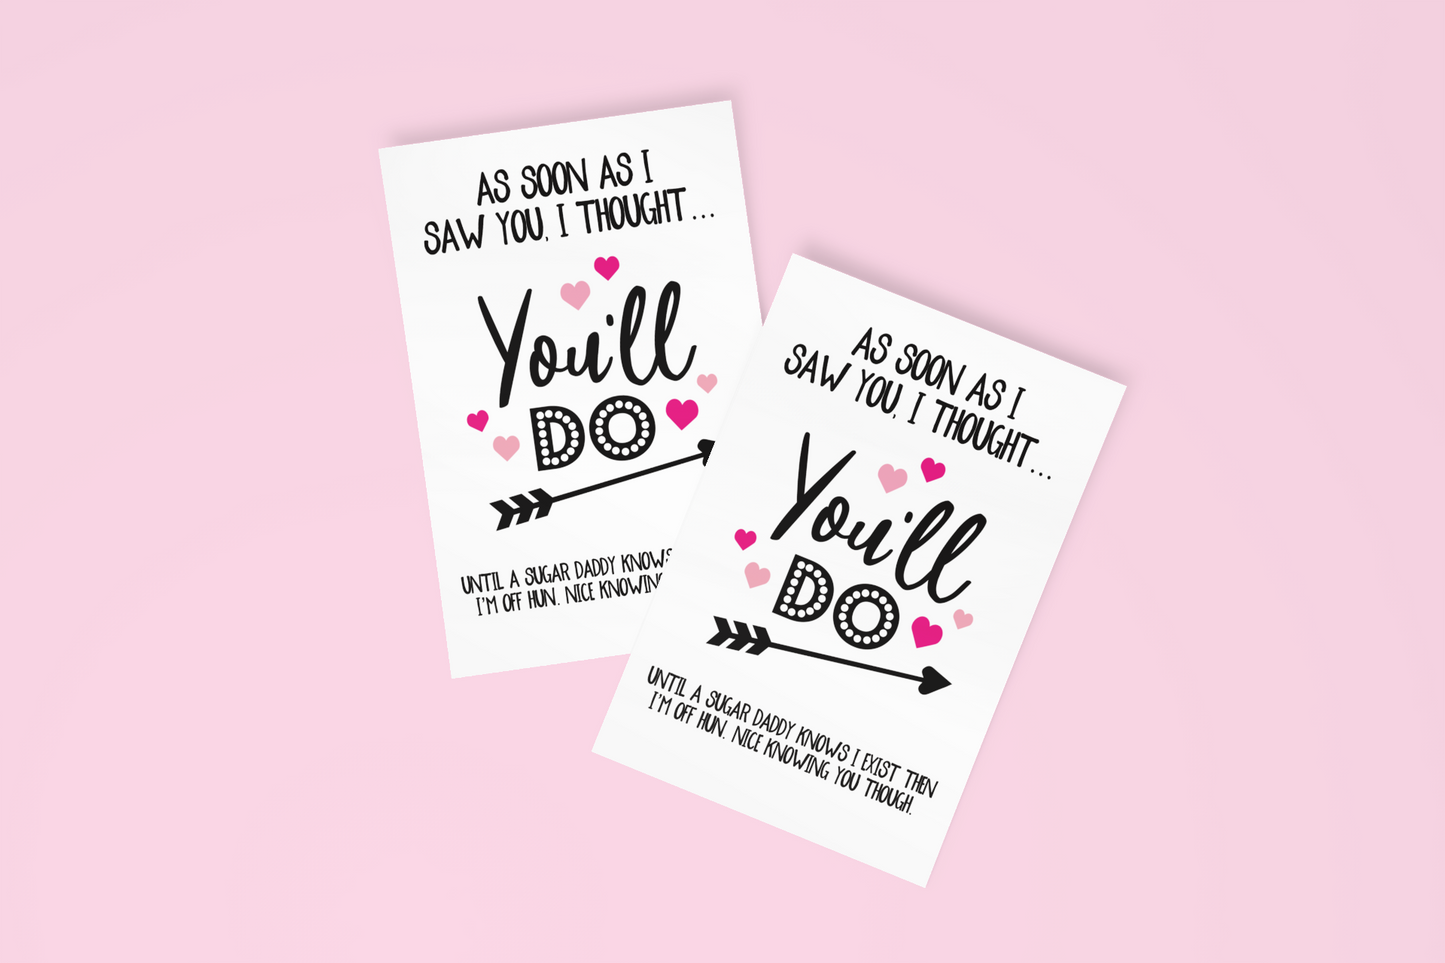 White vertical greetings card with the funny quote 'as soon as i saw you i thought, you'll do... Until a sugar daddy knows i exist then i'm off hun. It was knowing you though'. Printed in black ink with pink hearts surrounded it.